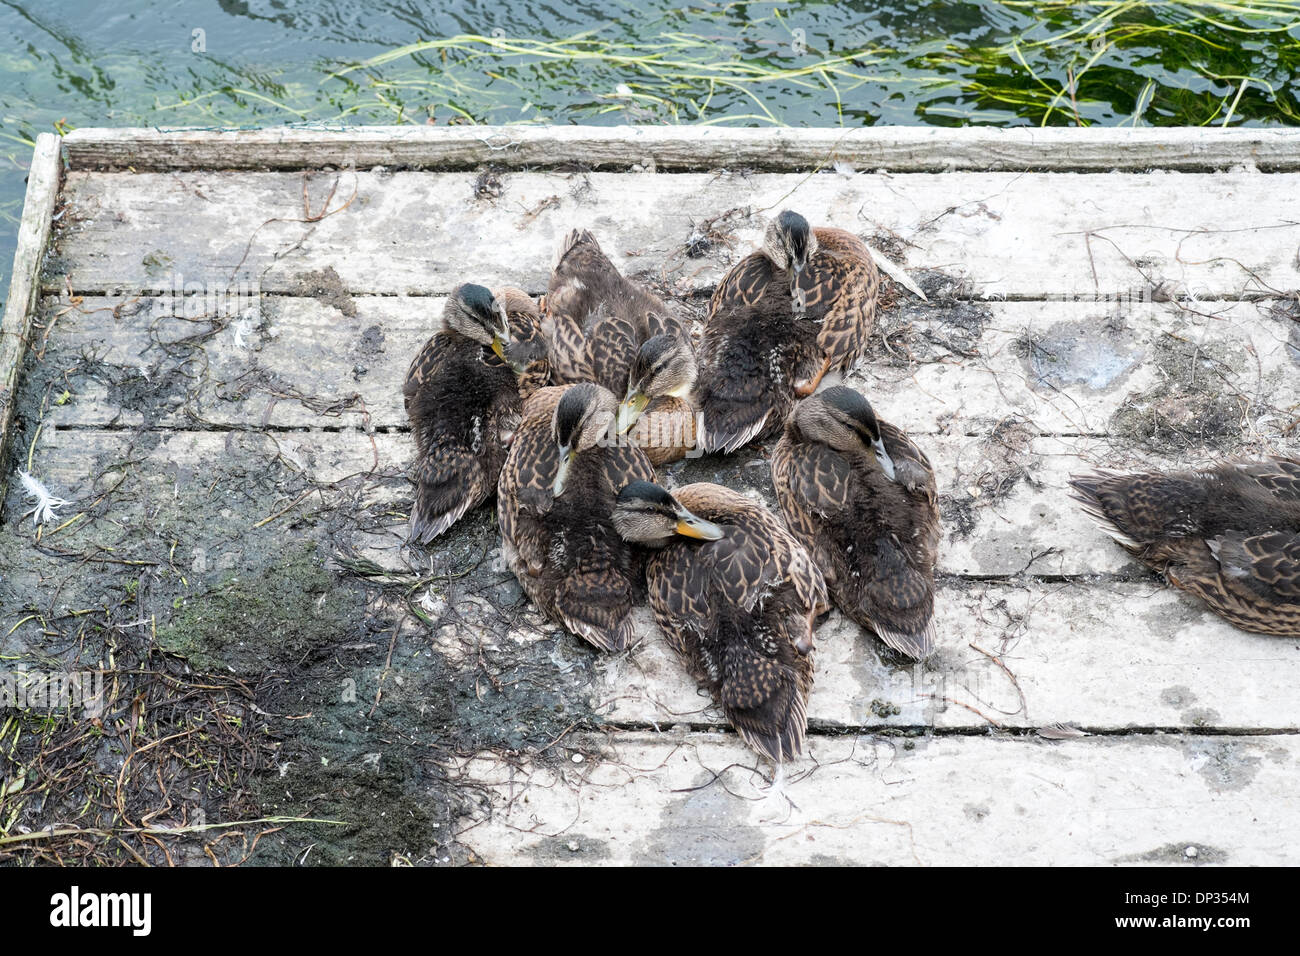 Ducklings huddled together sleeping on wooden platform next to river Stock Photo